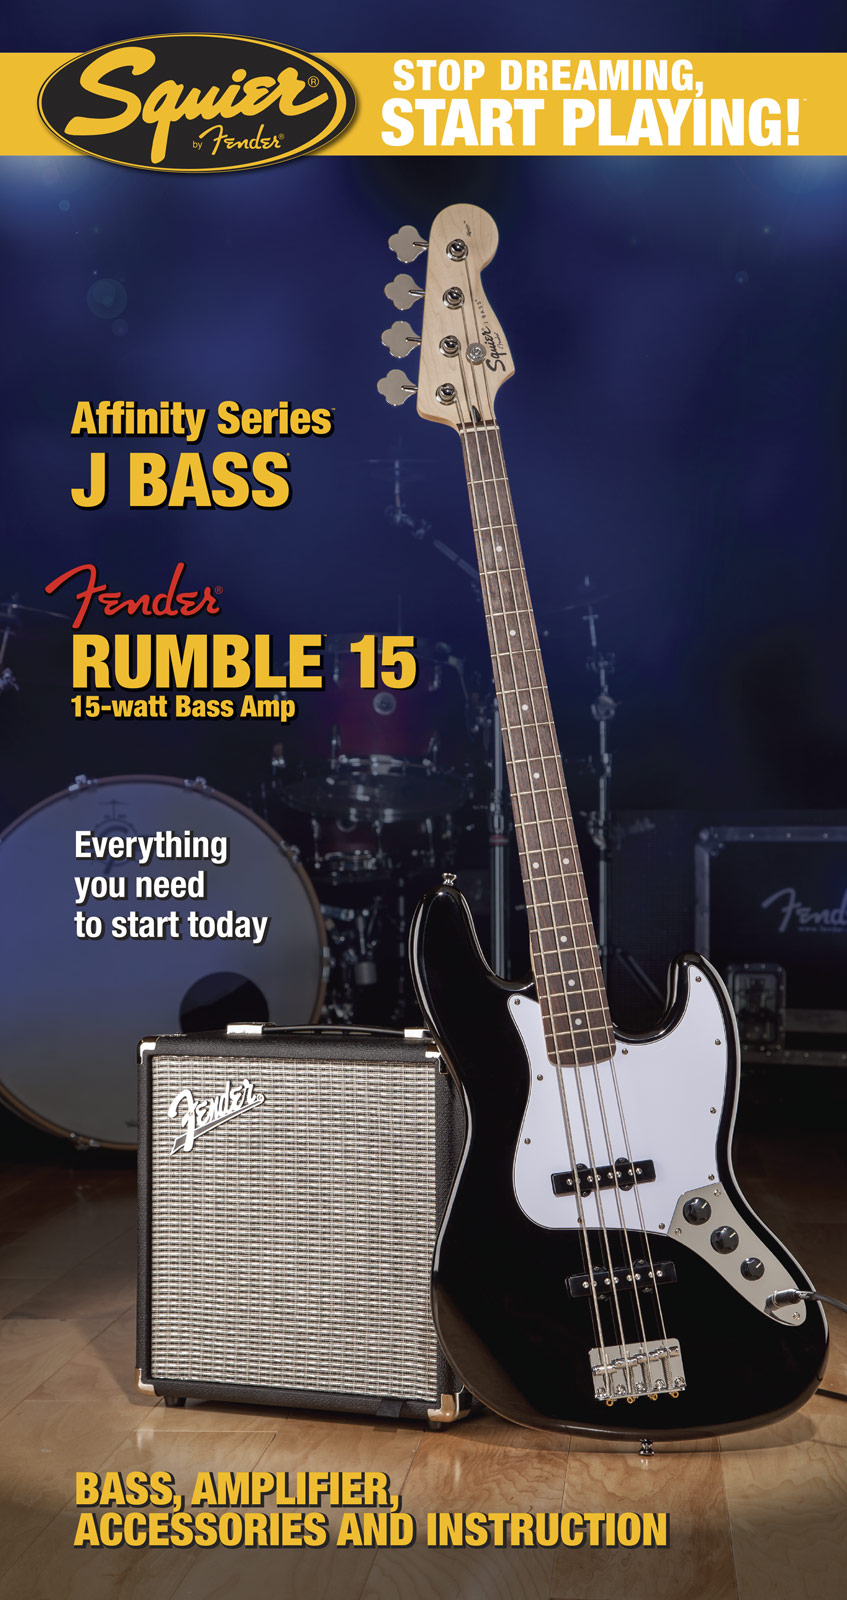 Squier Jazz Bass Affinity With Fender Rumble 15 Set - Black - Pack bajo eléctrico - Variation 1